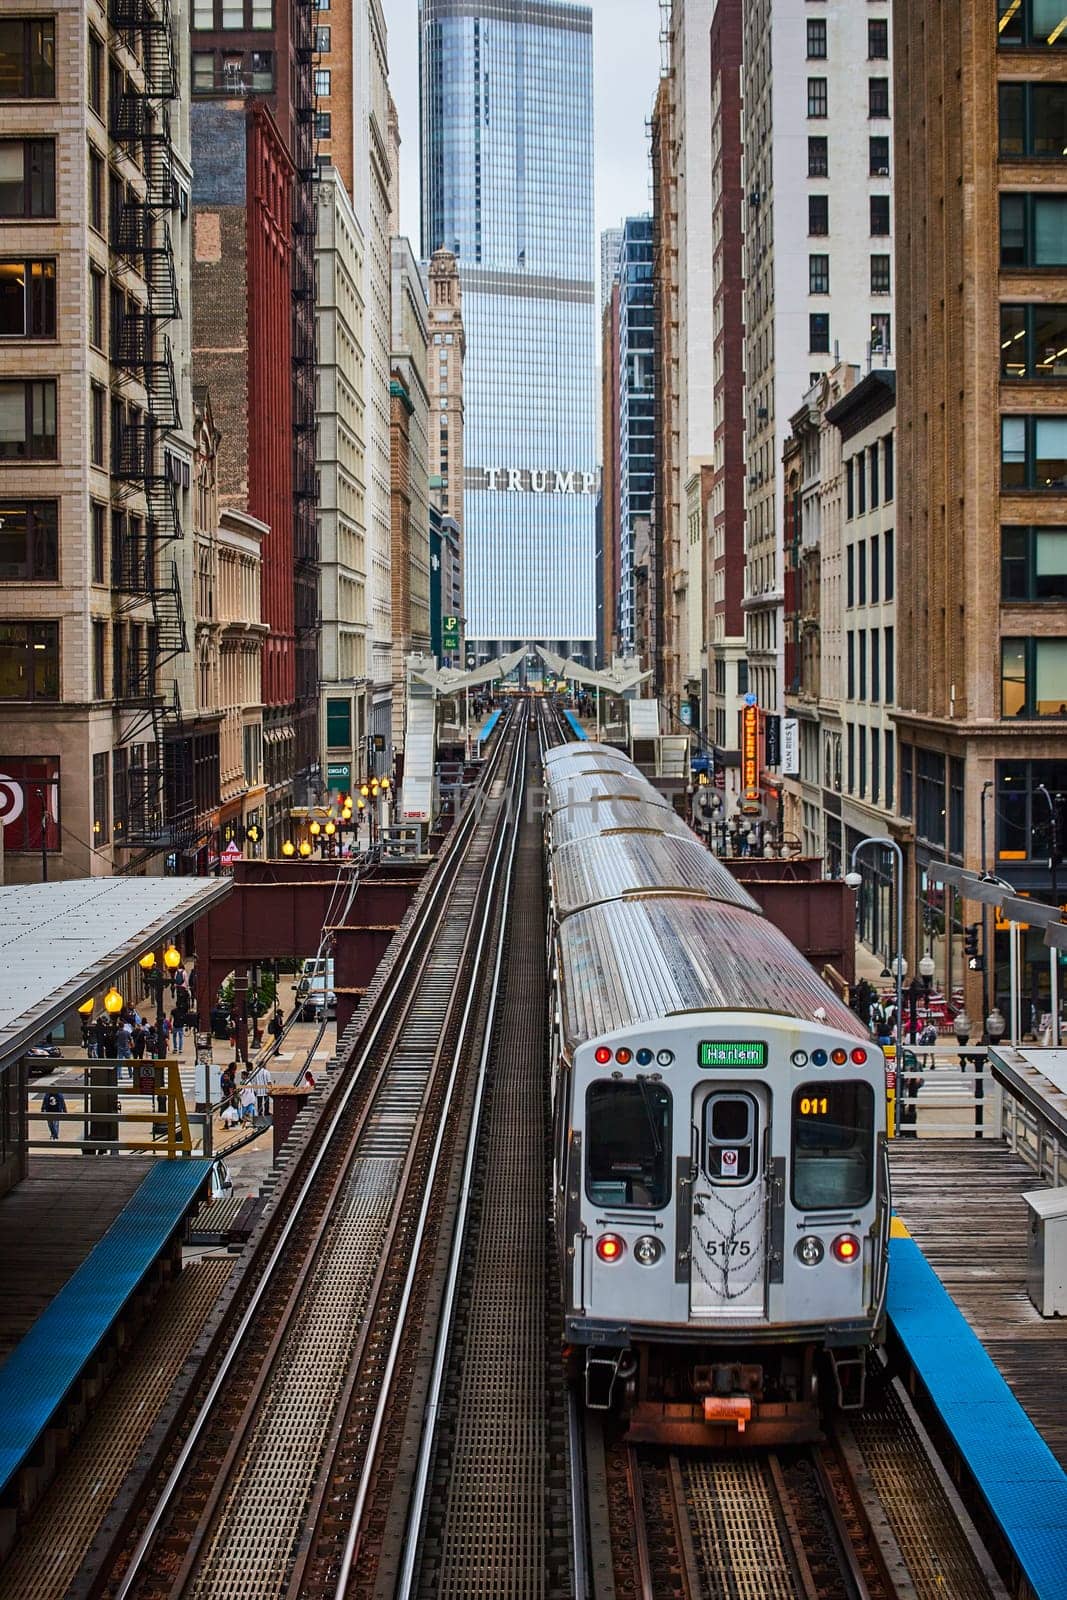 Daytime view of a sleek public transit train marked Harlem, ready on tracks amidst the diverse architecture of urban Chicago, 2023